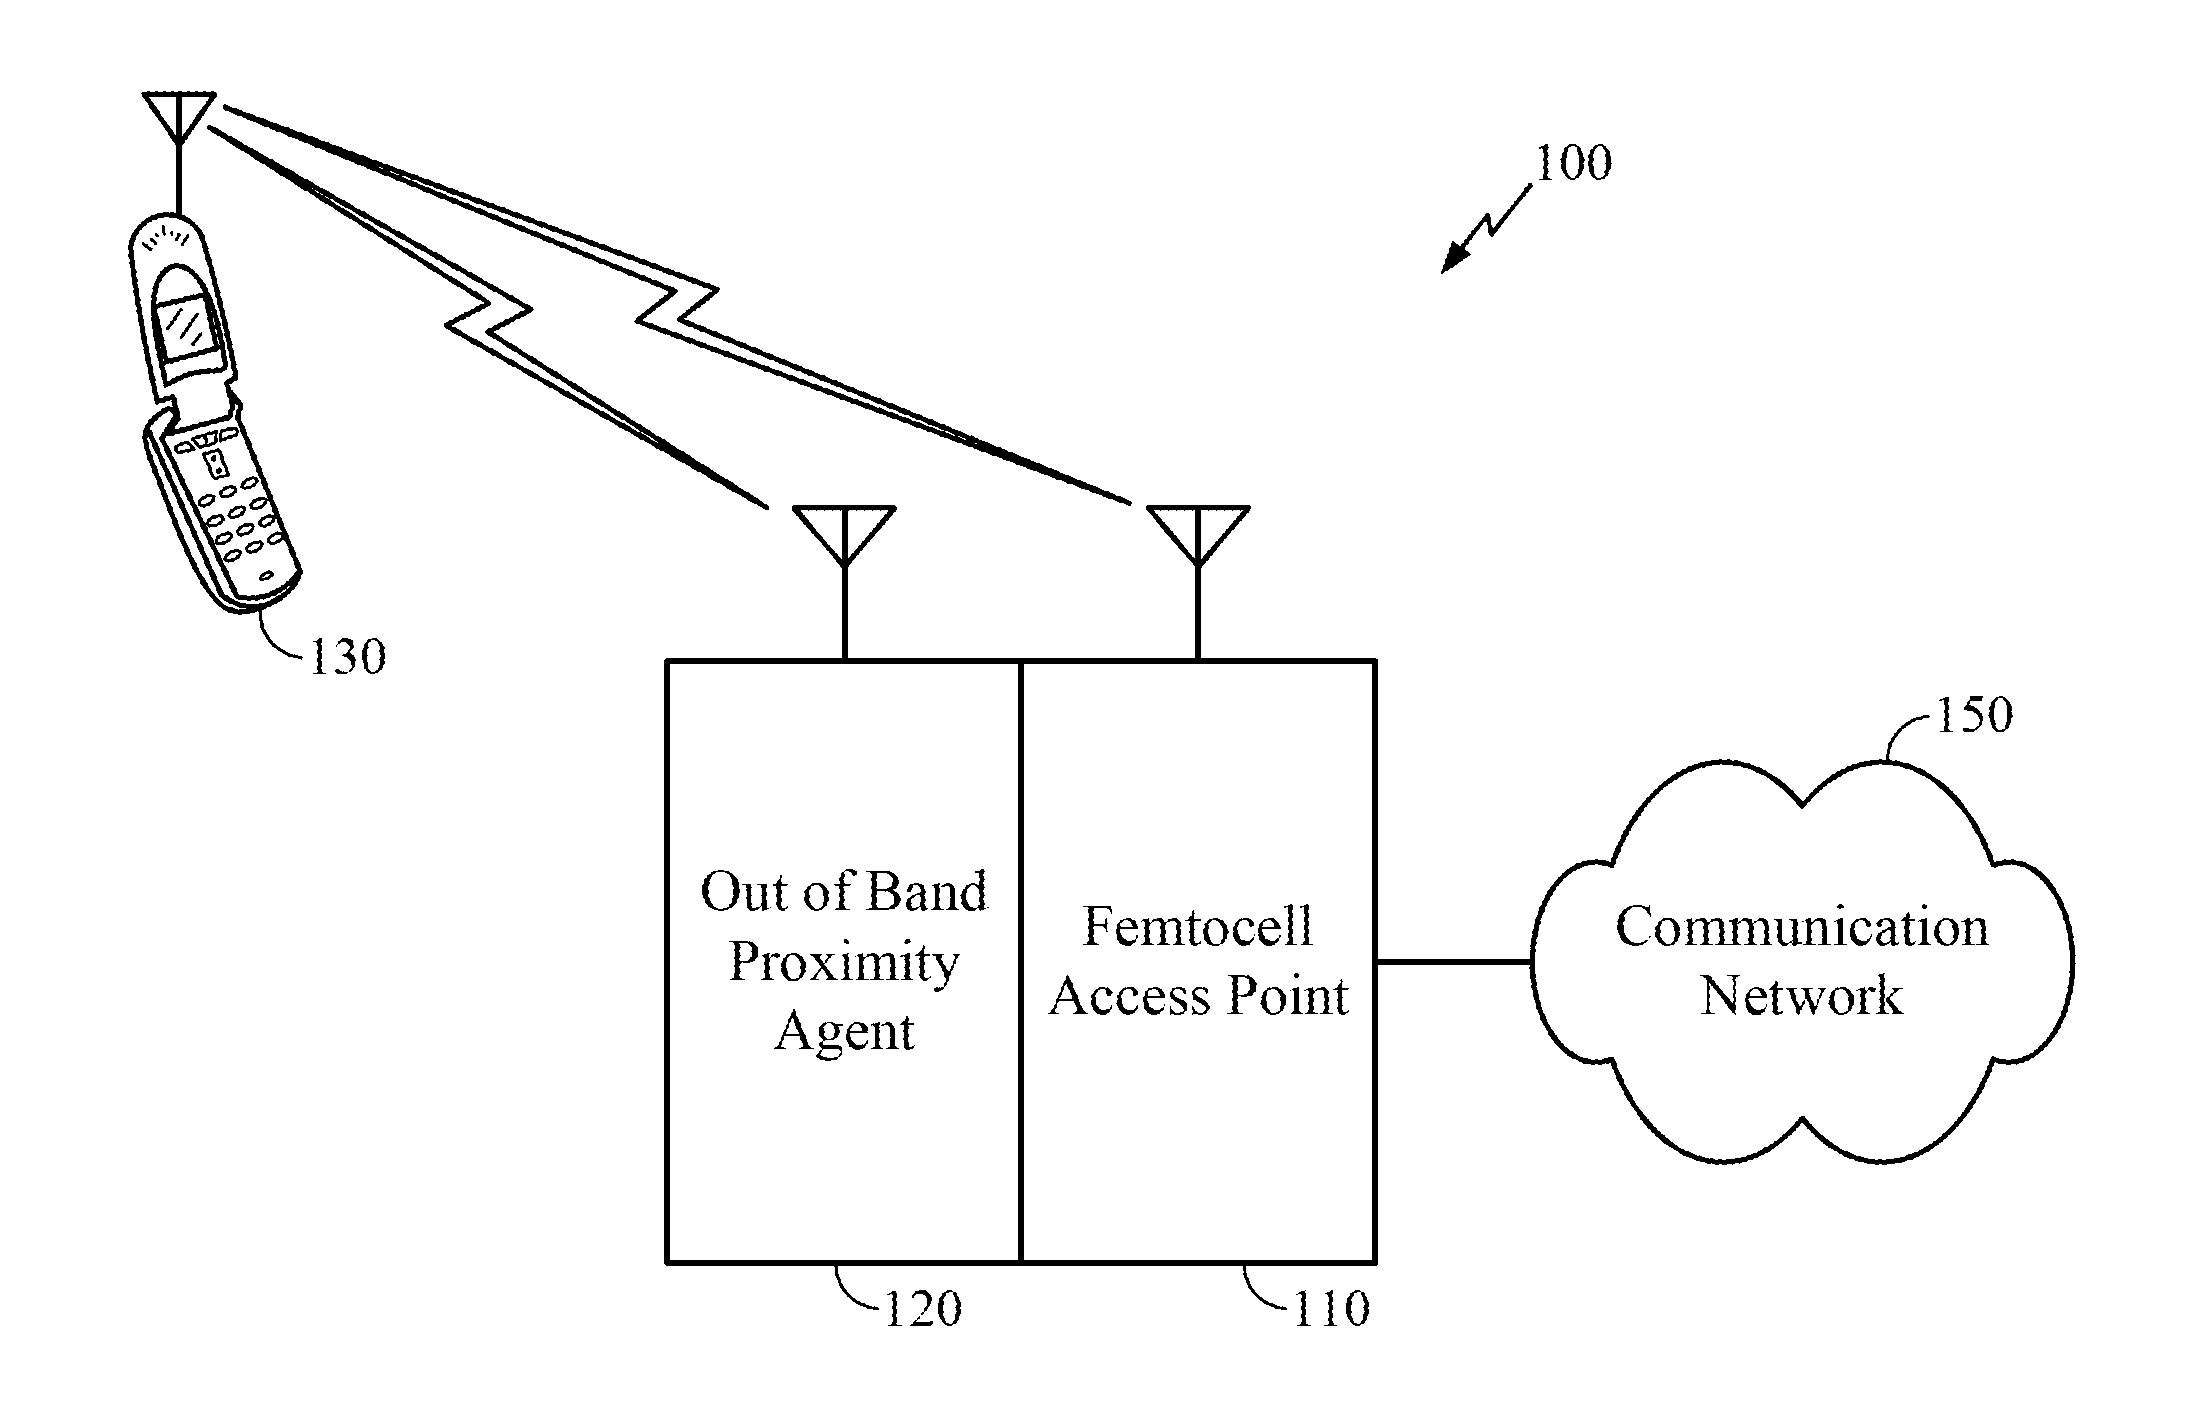 Proximity agent based out of band communication for femtocell operation